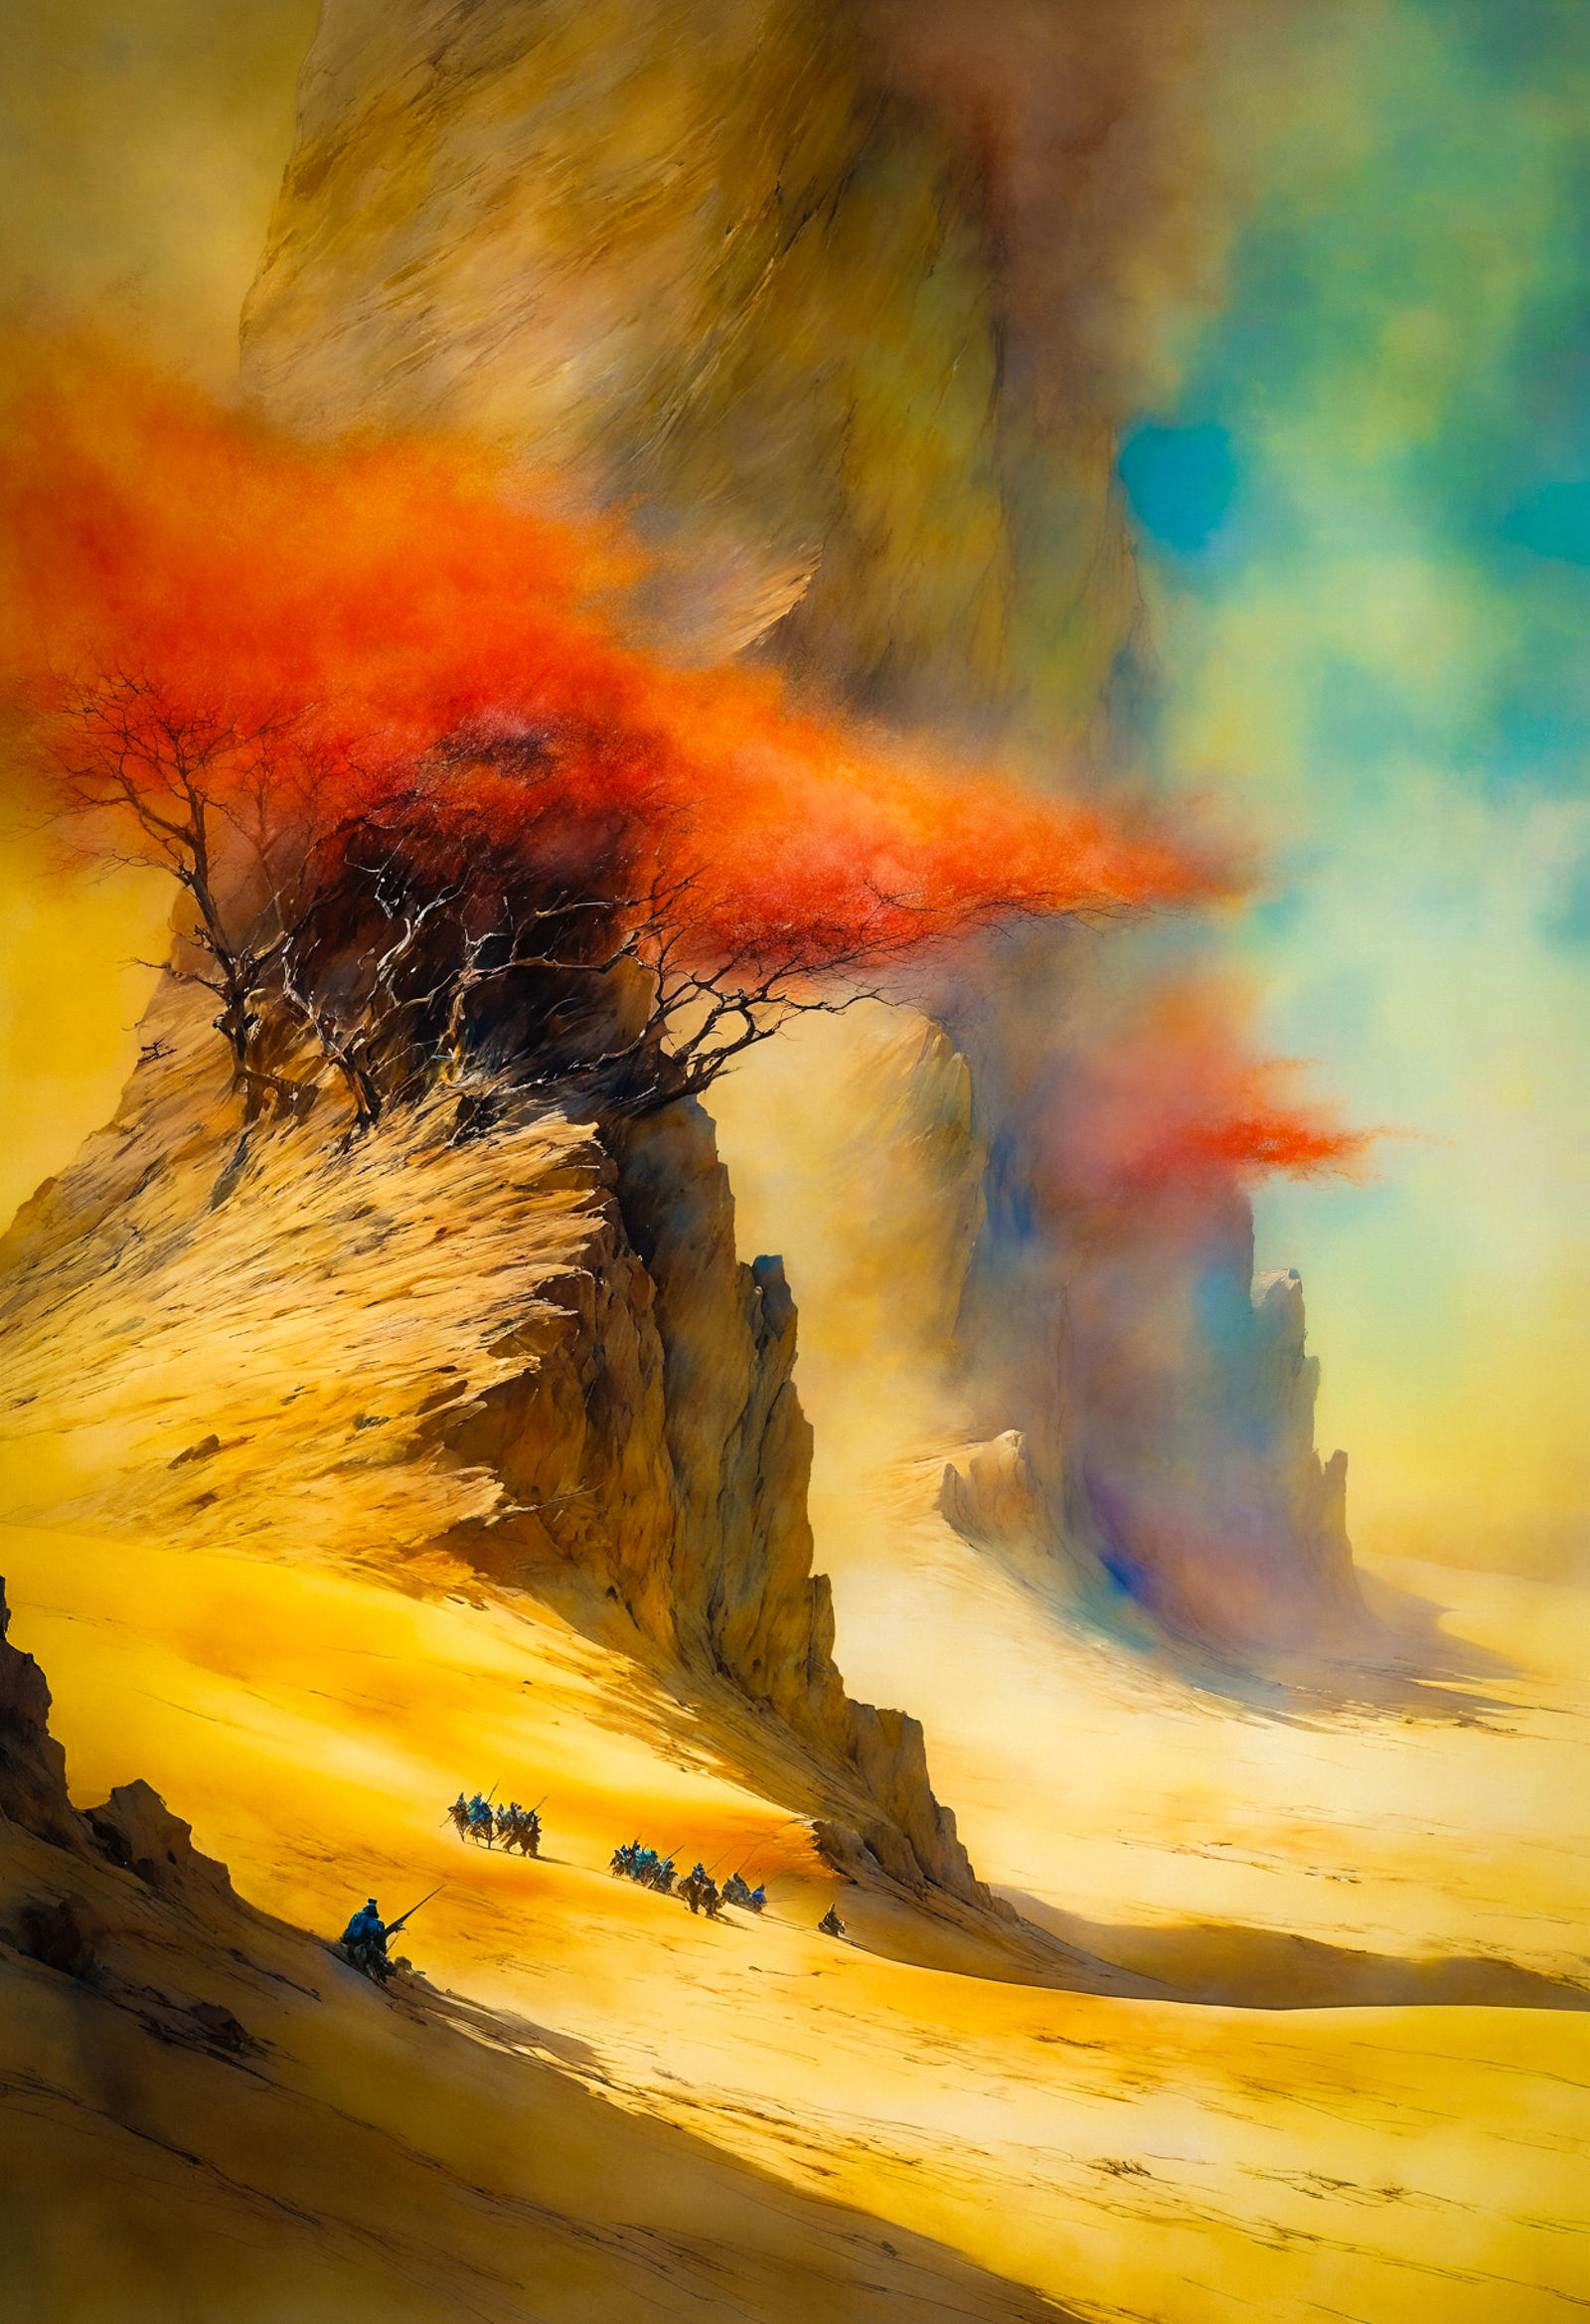 A group of people riding horses through a sandy desert landscape with a mountain in the background and a vibrant orange tree.